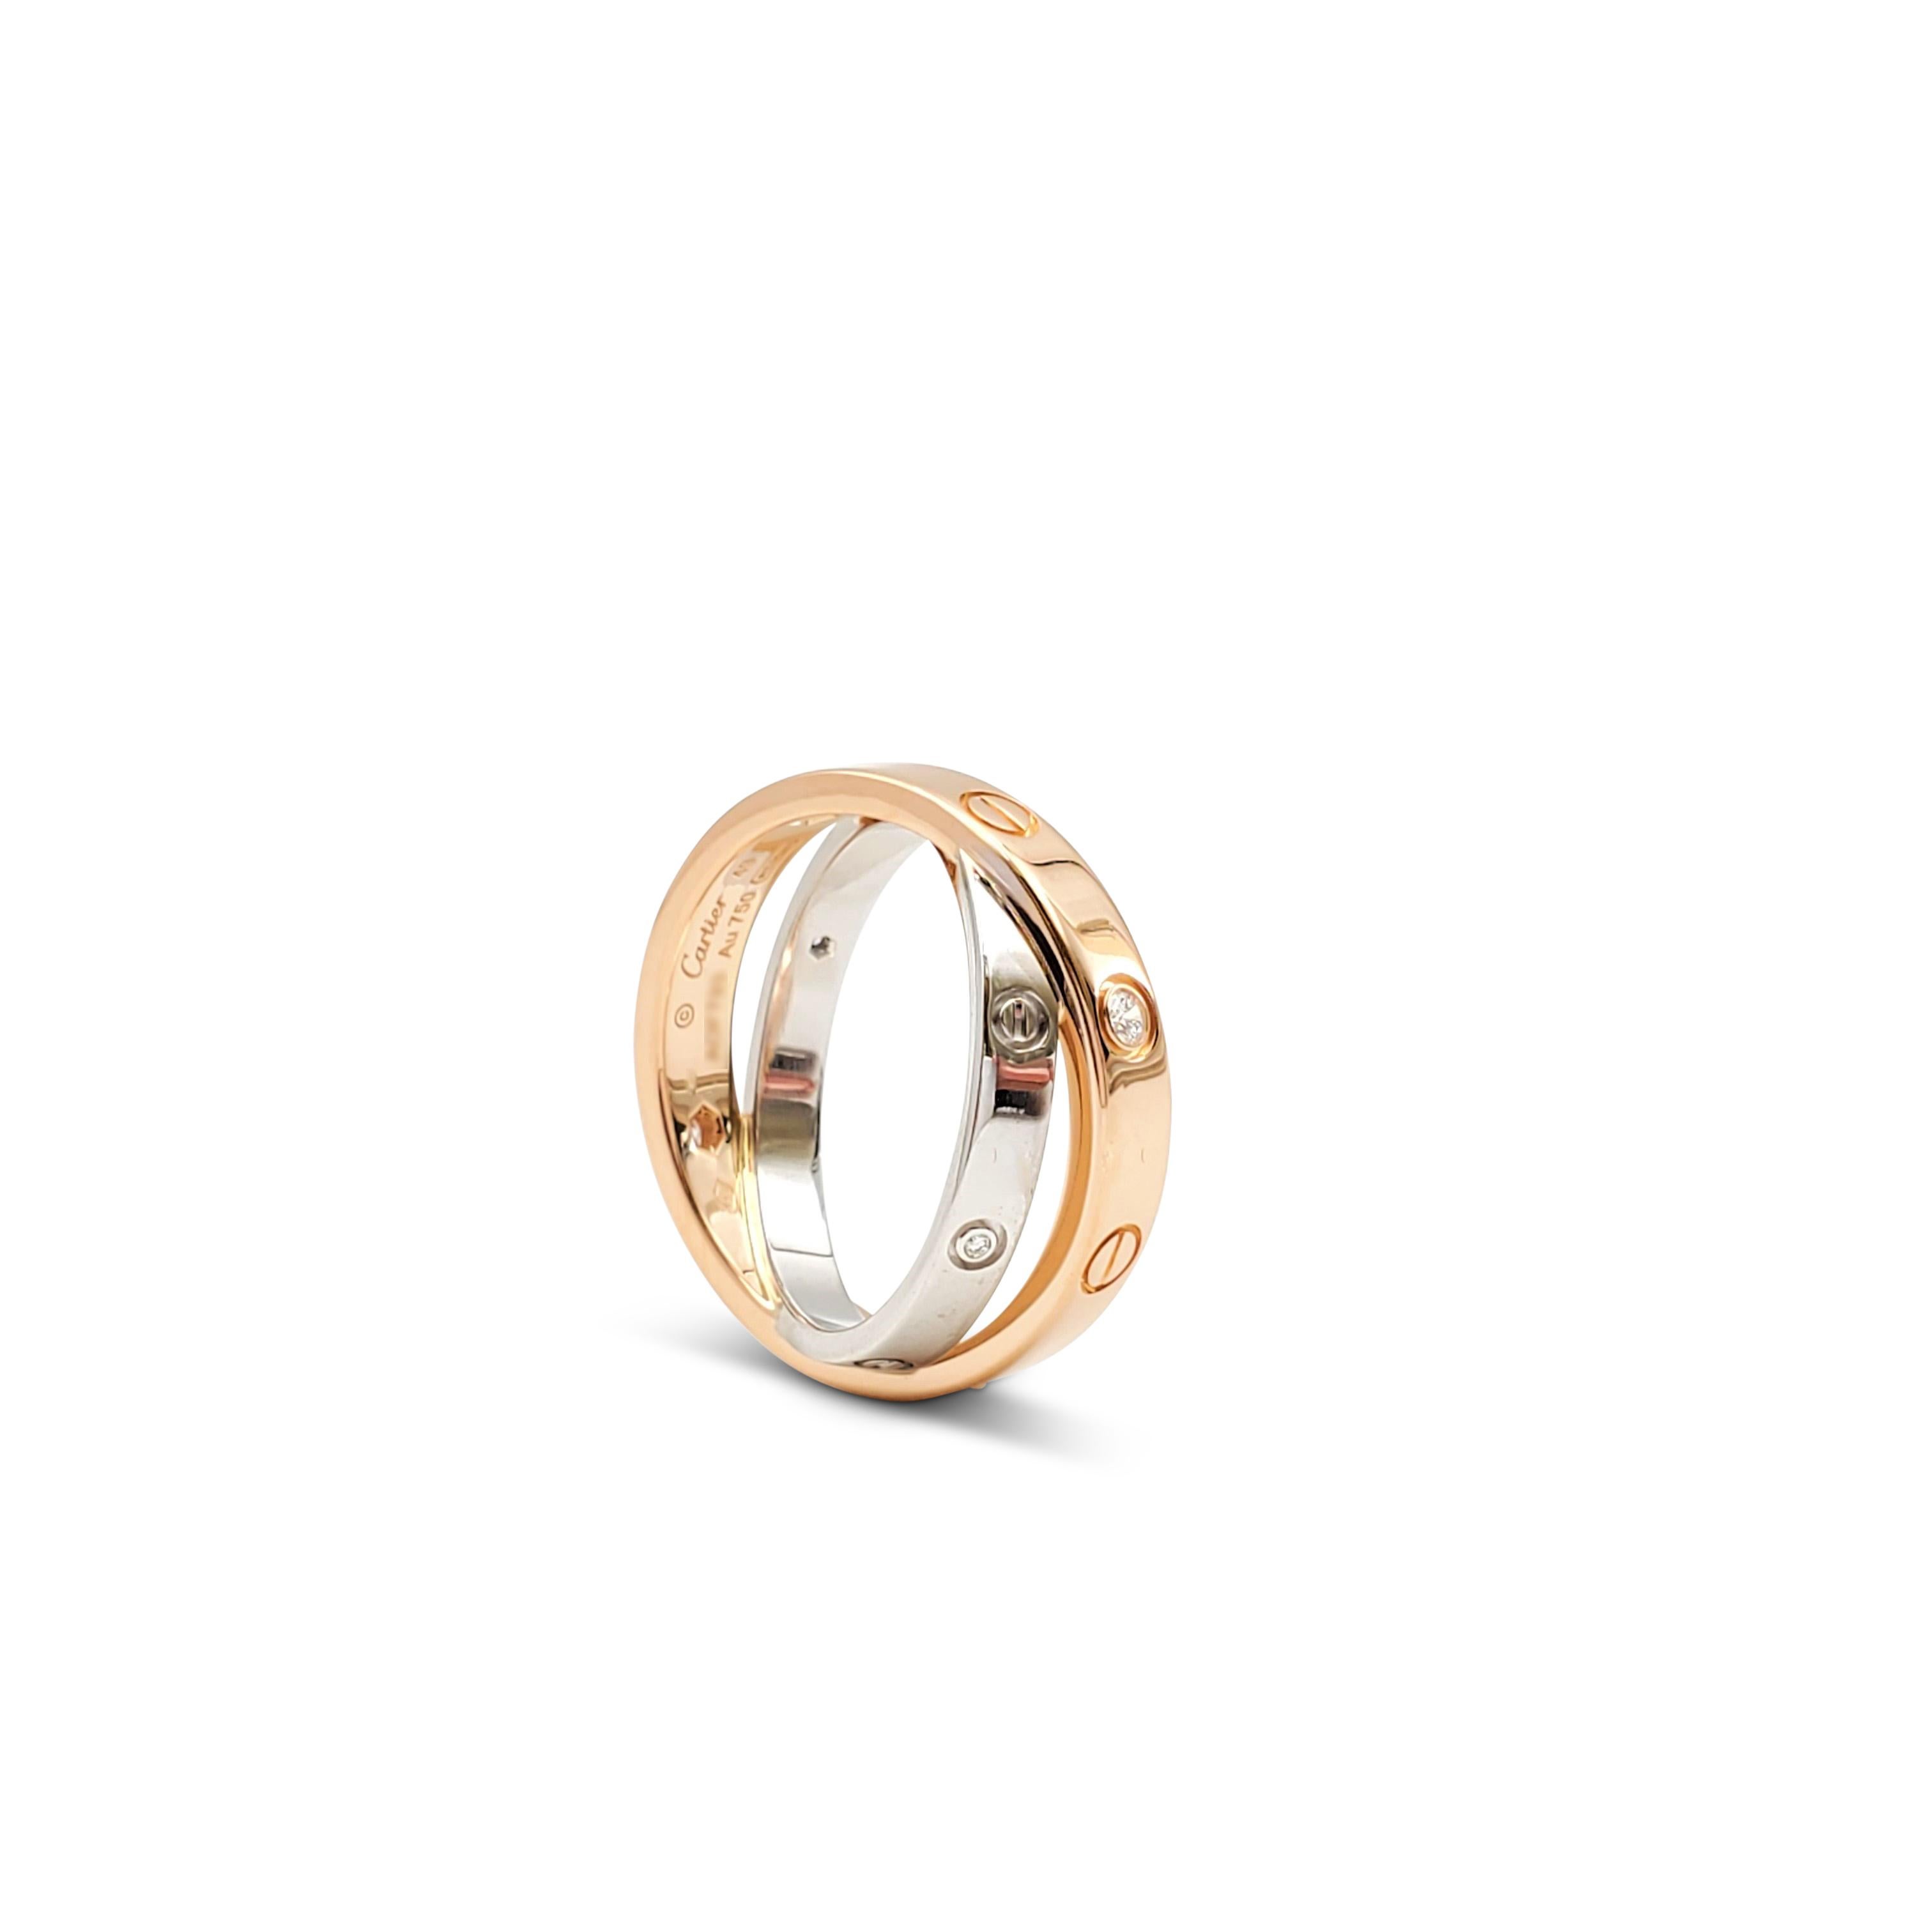 Authentic Cartier Love ring crafted in 18 karat rose and white gold.  Set with 6 round cut diamonds weighing an estimated .07 carats total.  The rose gold band measures 3.5mm and crosses over a slightly thinner white gold band, measuring 2.6mm. 